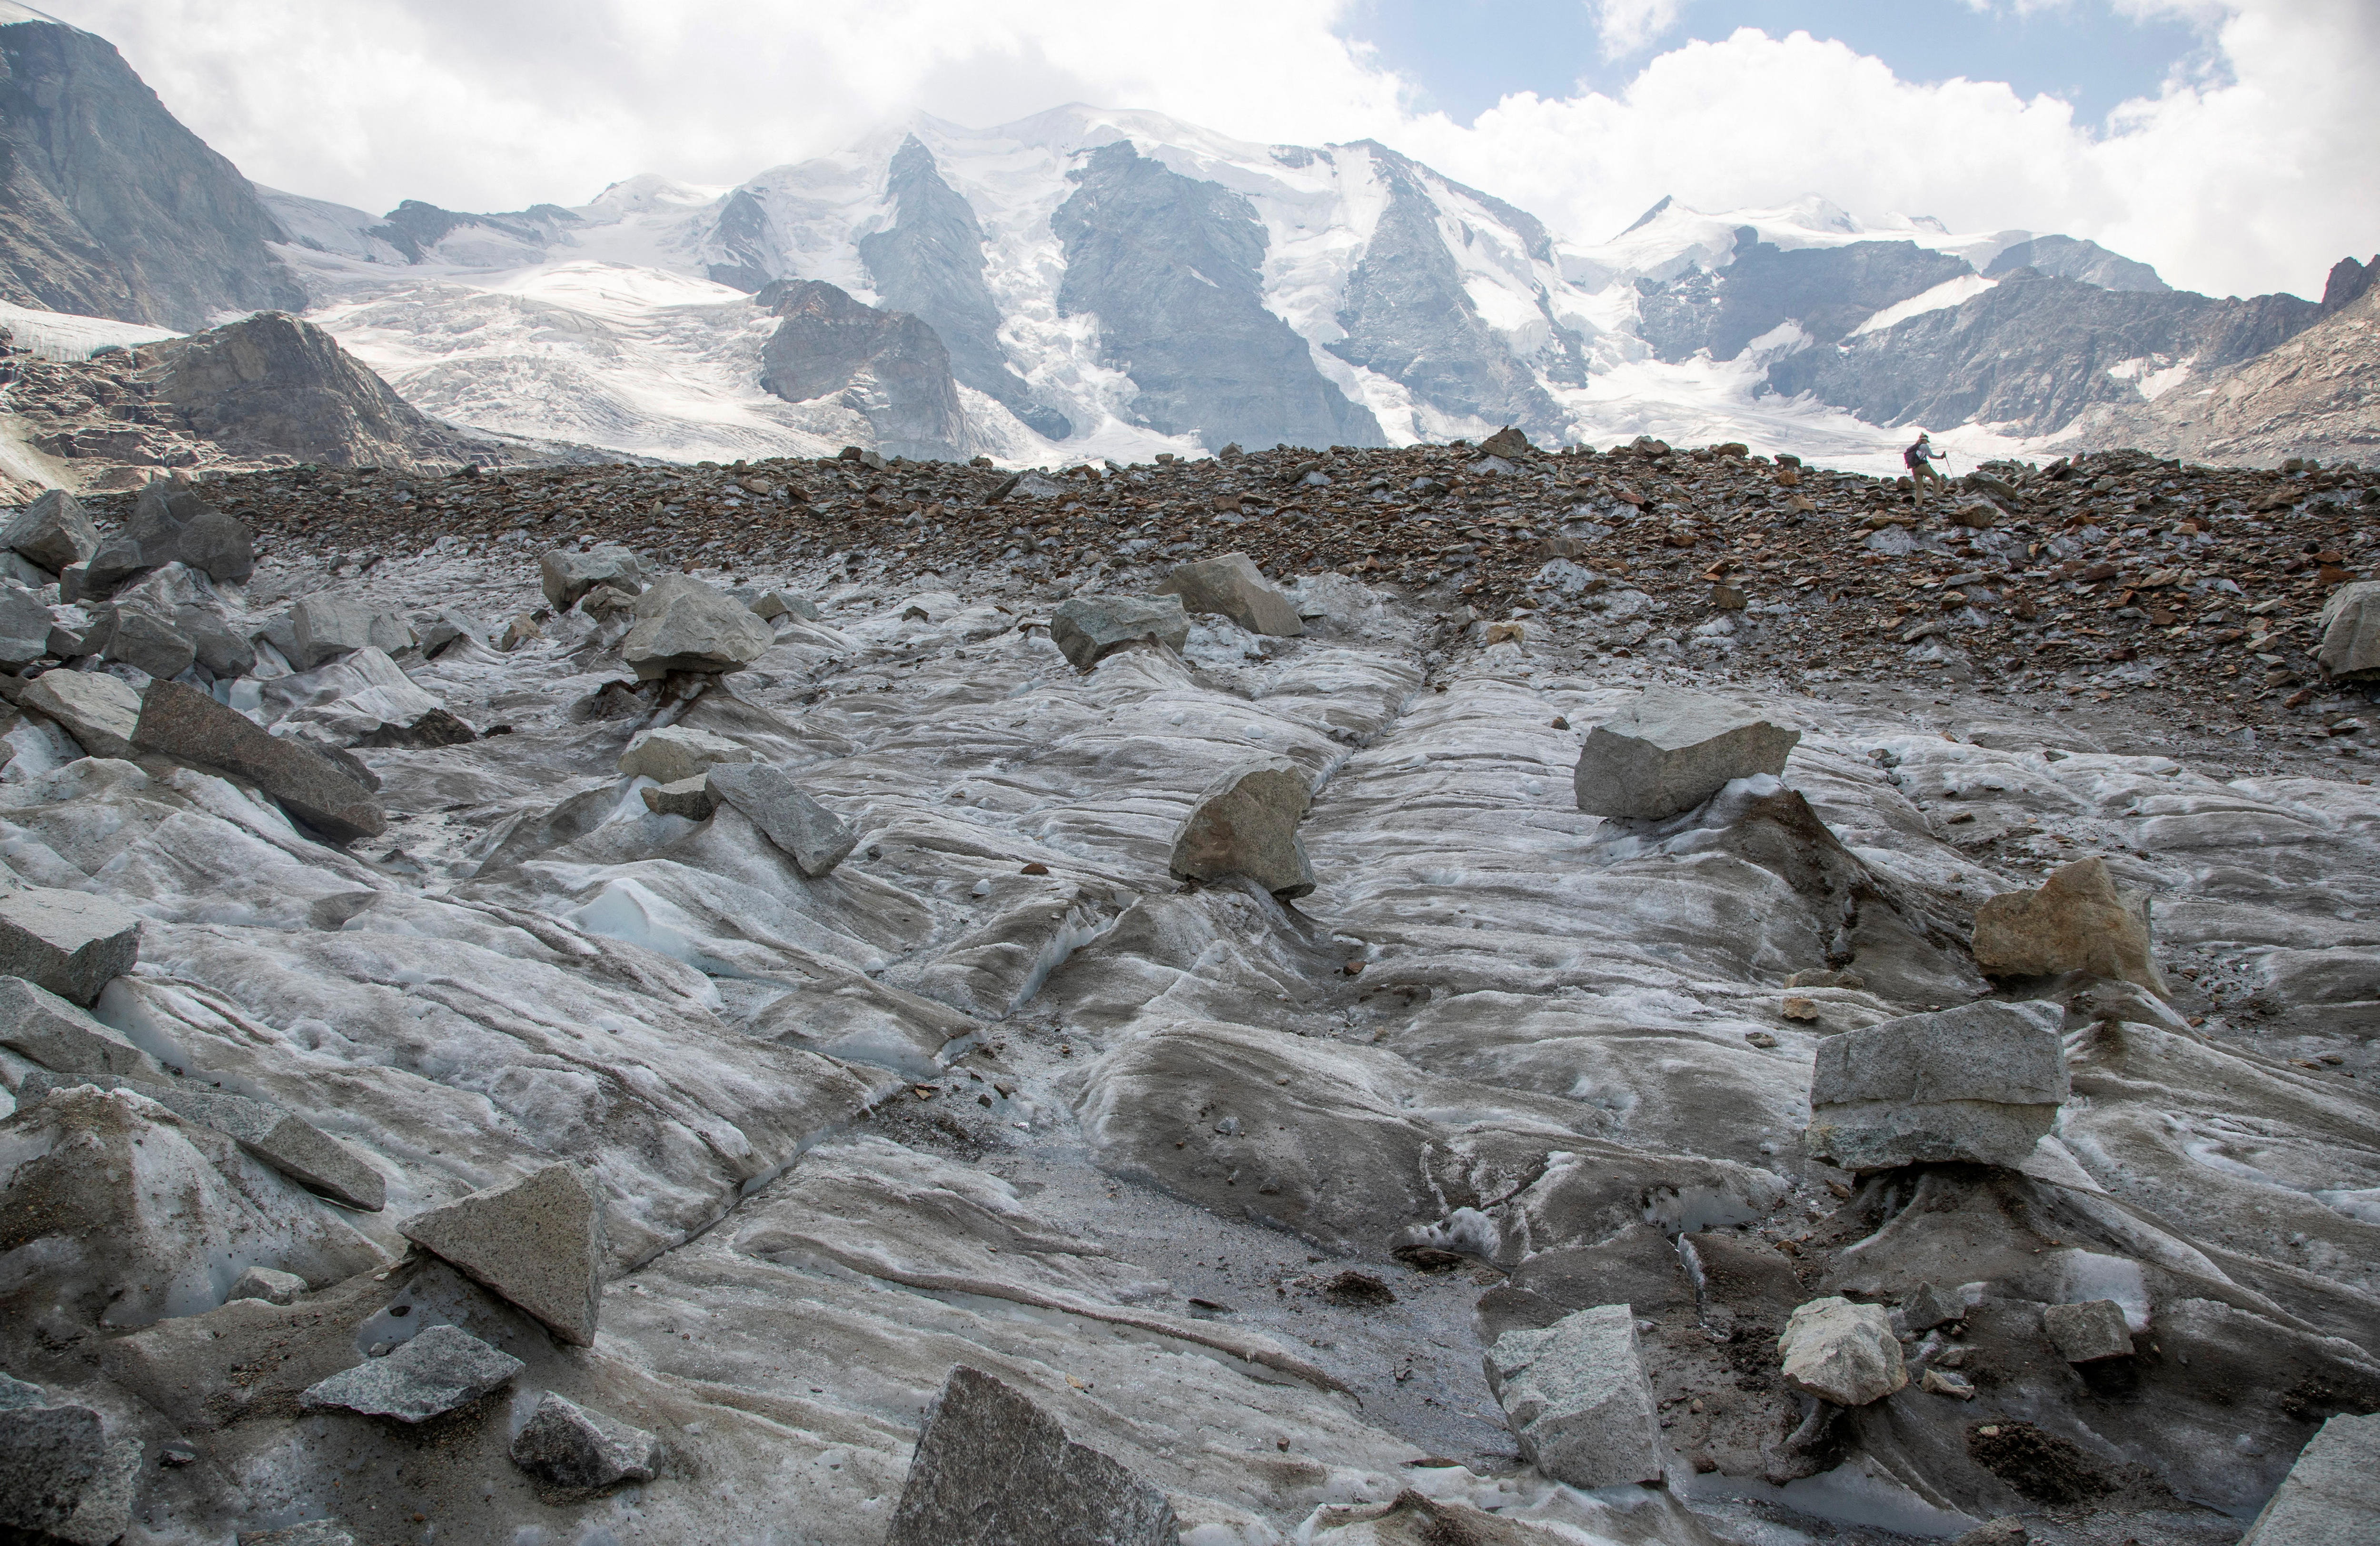 A hiker in the background walks over a glacier. Rocks and ice can be seen in the foreground. 